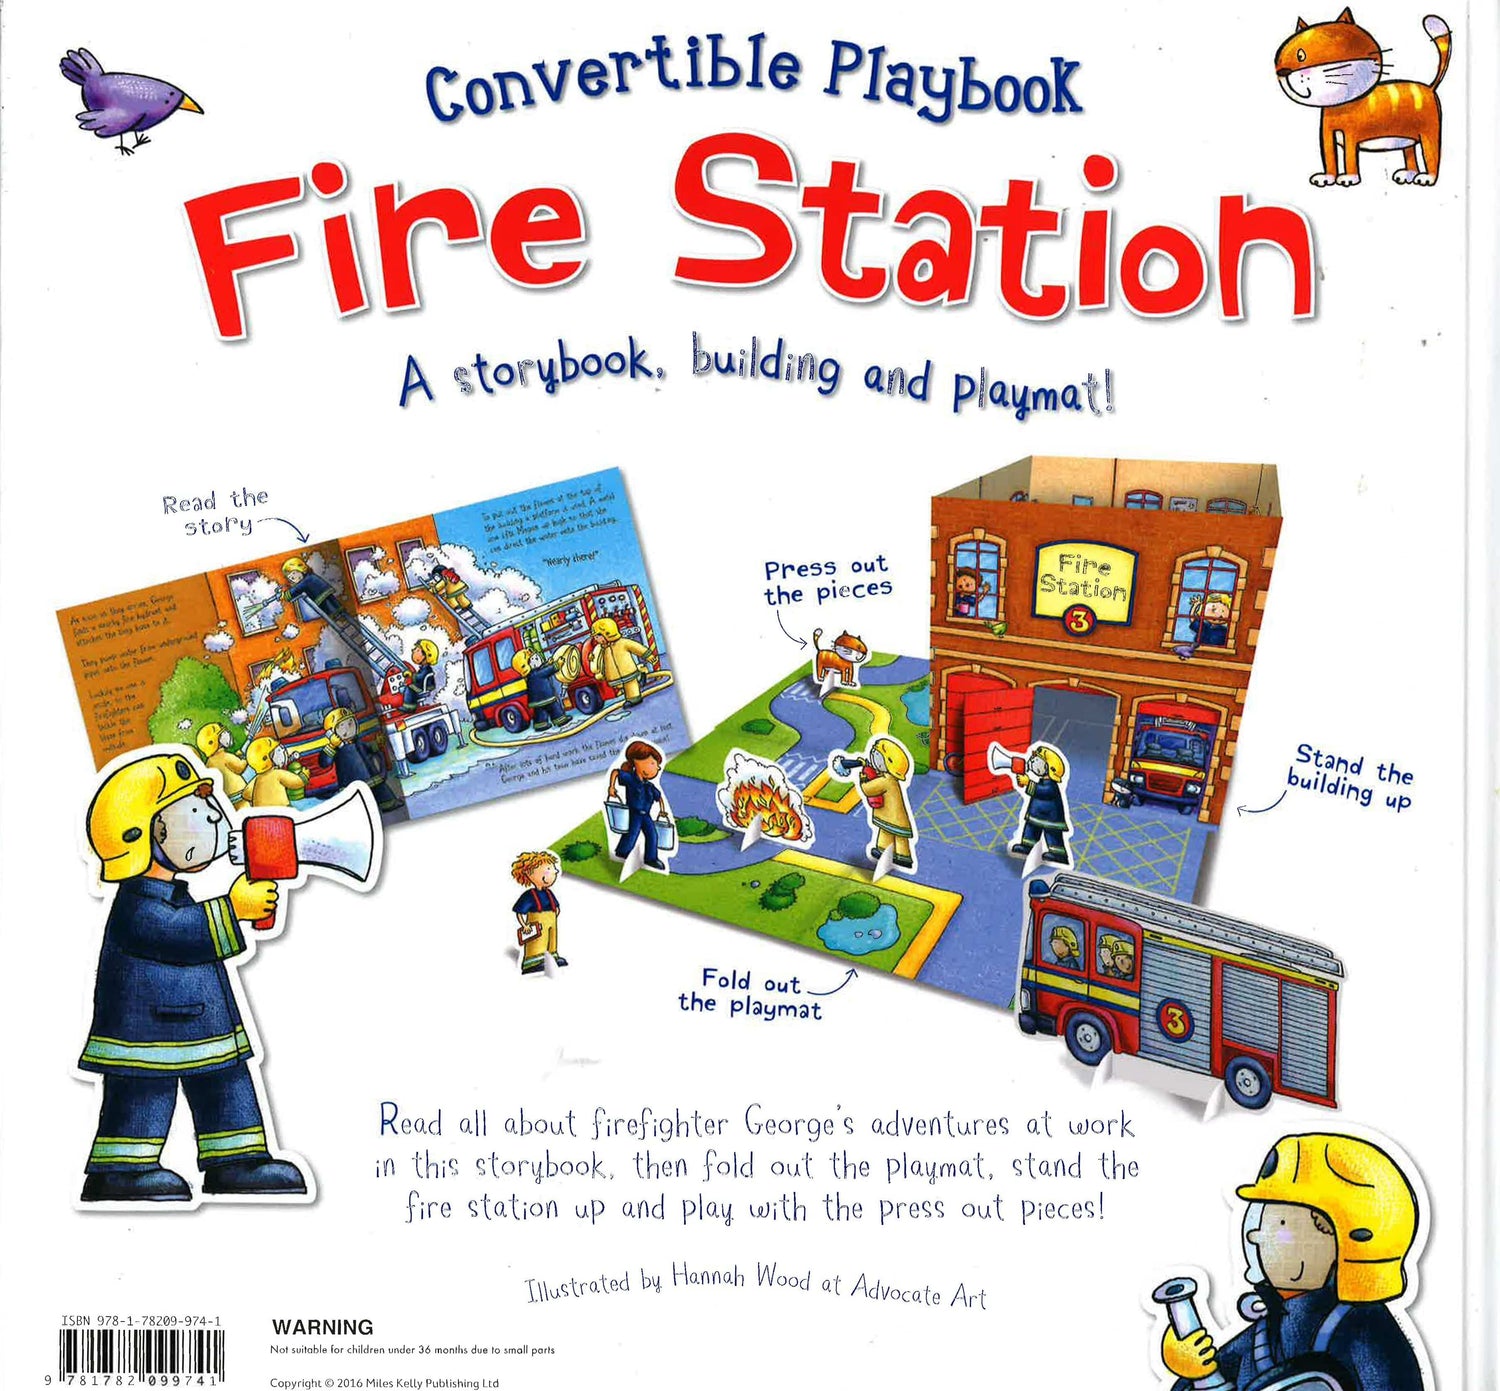 Convertible Playbook Fire Station